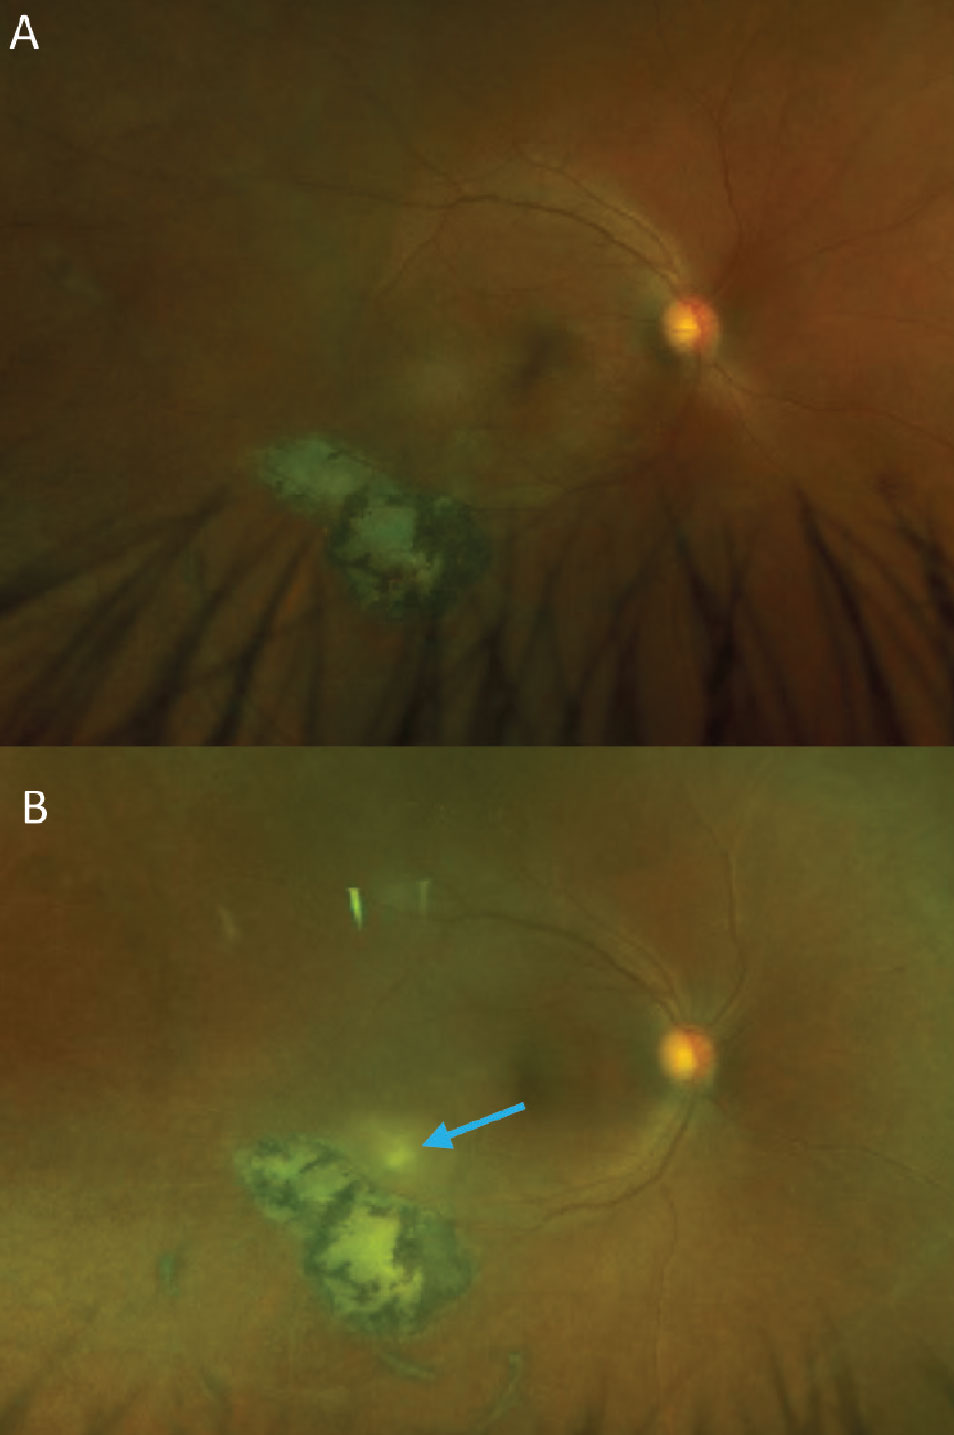 Fig. 8. (A) A patient with an inactive toxoplasmosis gondii chorioretinal scar. (B) The same patient with a reactivated infection. The new, white retinal lesion can be seen just superior to the existing scar. A mild vitritis is evident from the haziness of the photo compared to the original. Small cells can be seen on close inspection of the optos photo as well as within the vitreous on the OCT B-scan (green arrows, C). This patient was seen very soon after acutely noticing new floaters in their vision and the vitritis in this case is more subtle than is often seen with toxoplasmosis.